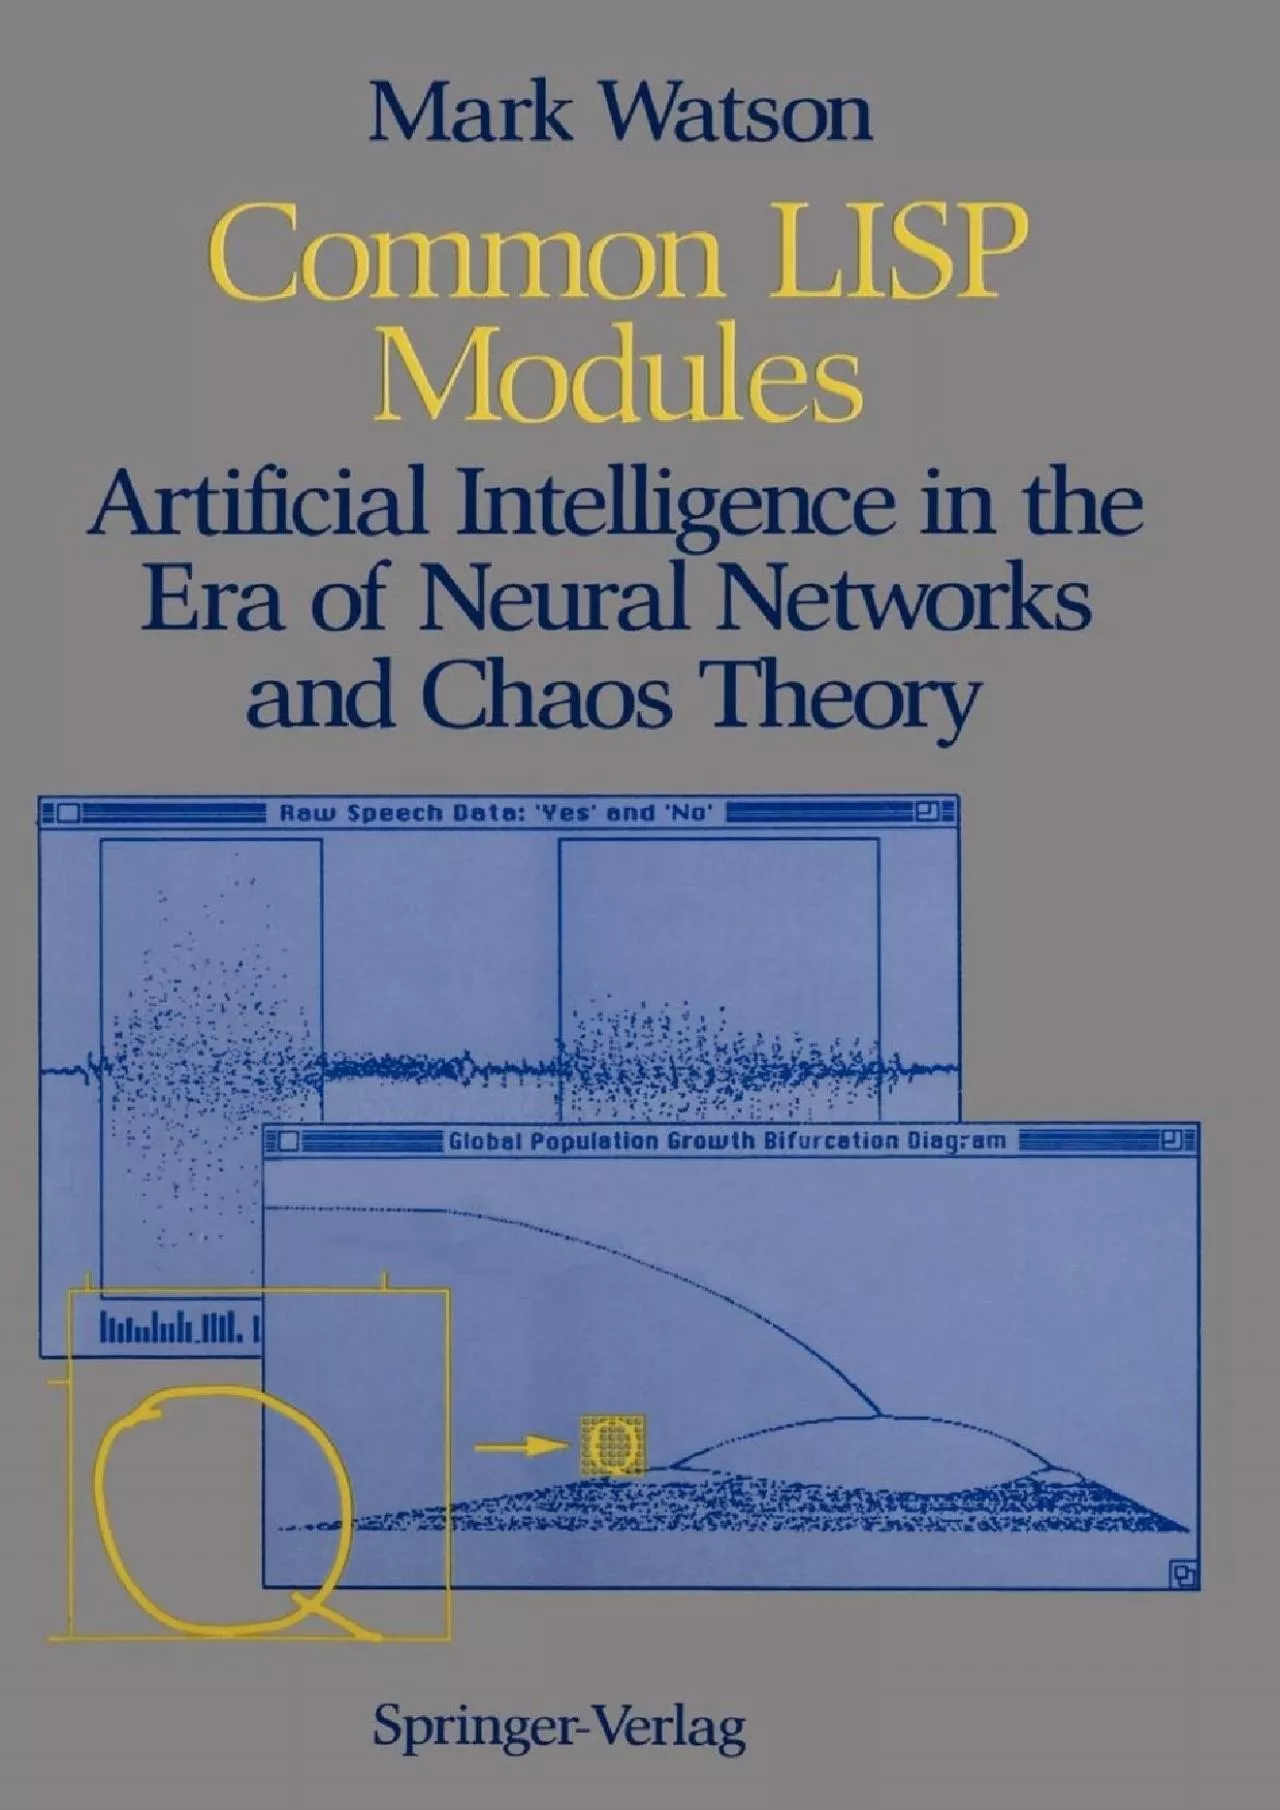 [FREE]-Common LISP Modules: Artificial Intelligence in the Era of Neural Networks and